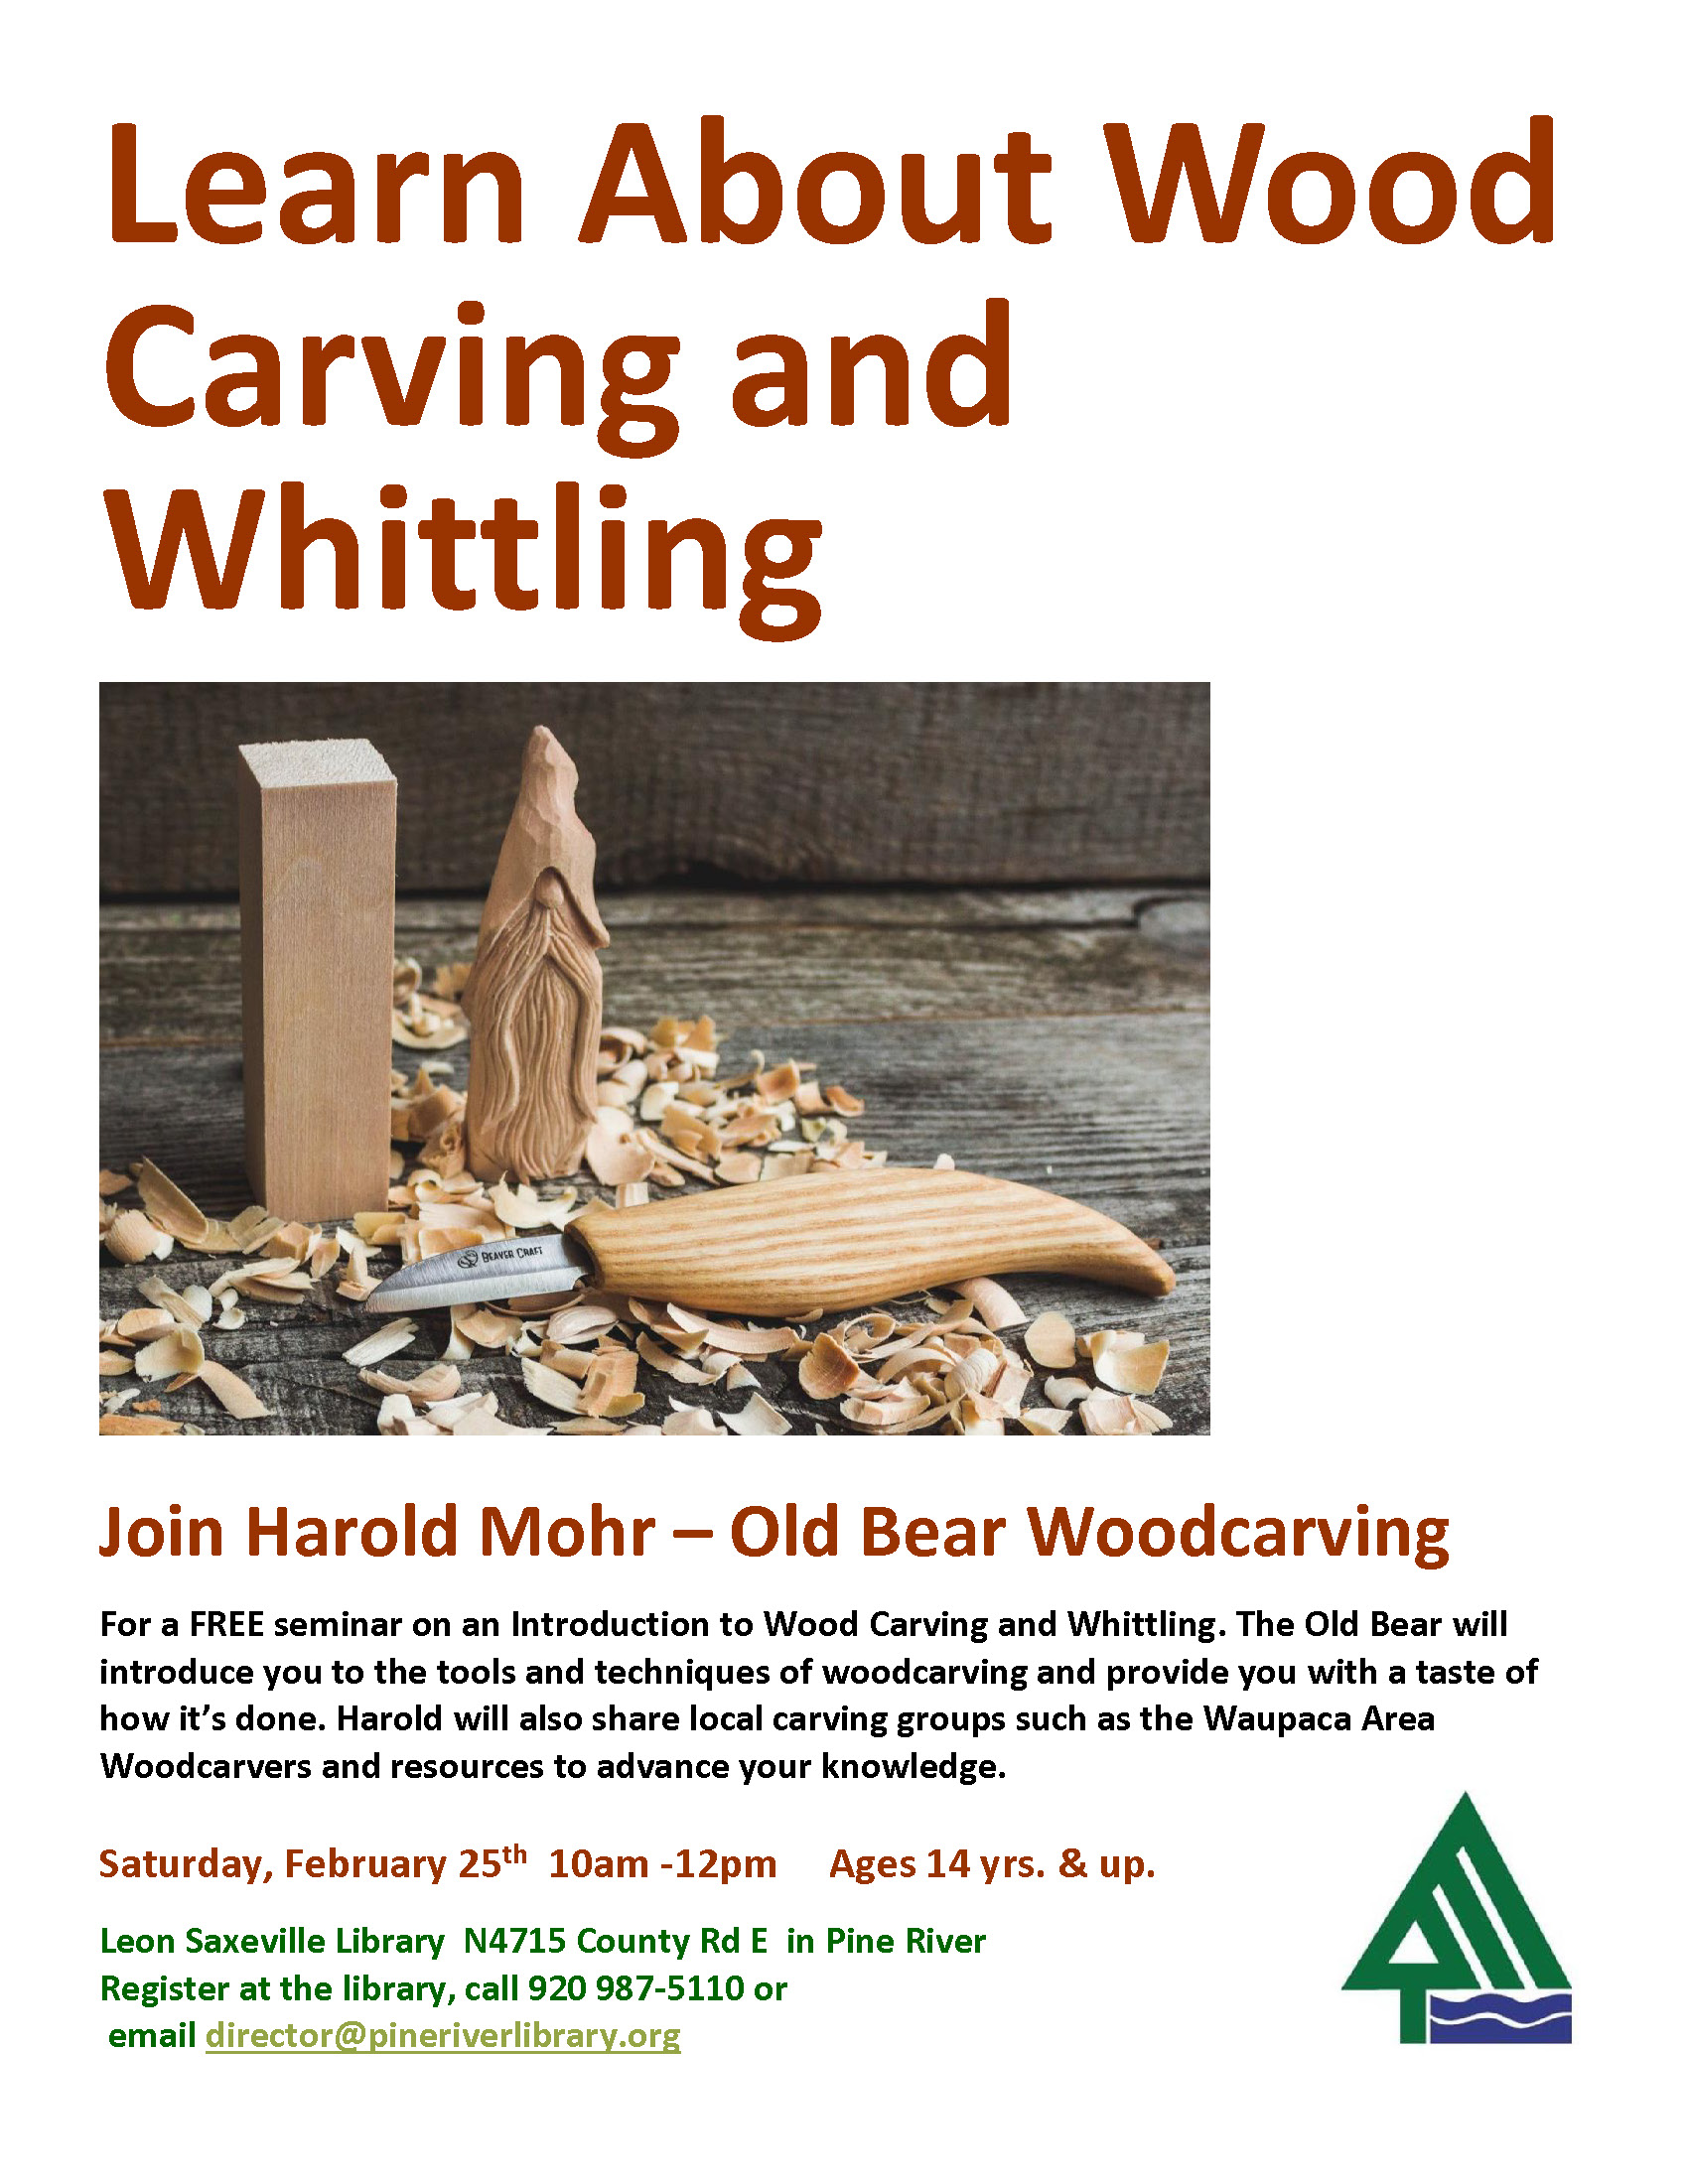 Learn About Wood Carving and Whittling